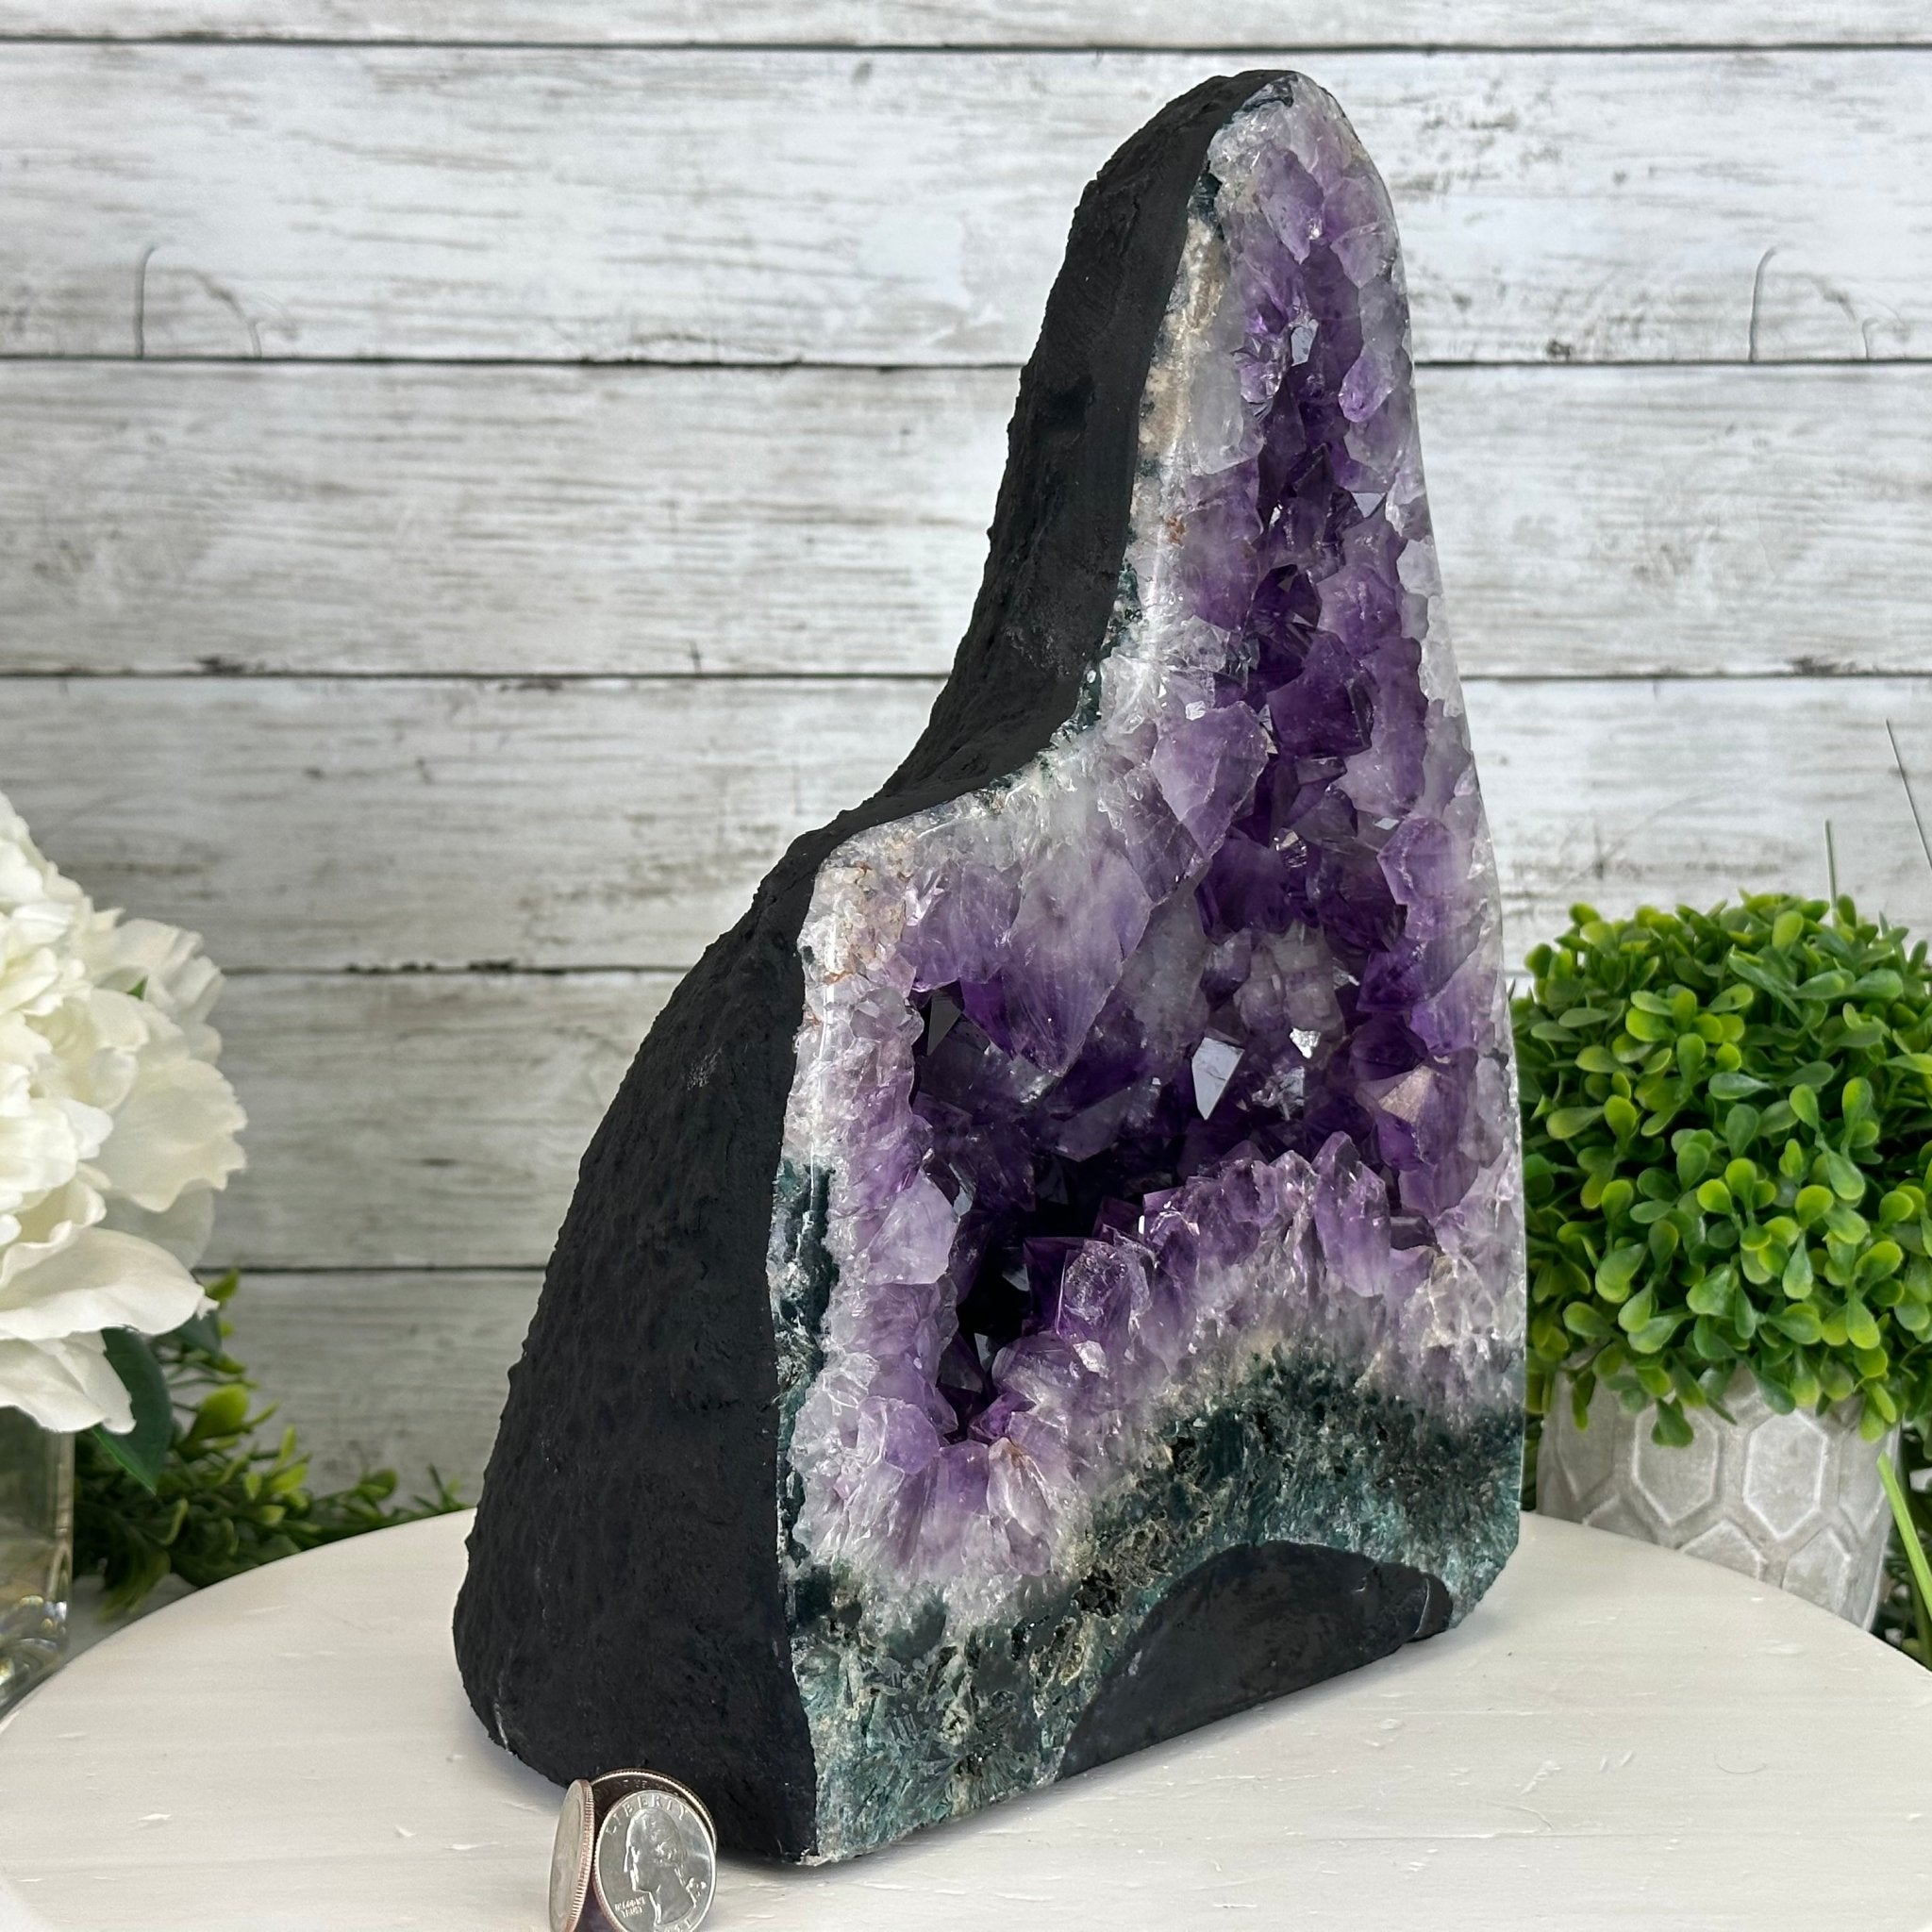 Extra Plus Quality Brazilian Amethyst Cathedral, 19.3 lbs & 11.8" Tall, Model #5601-1075 by Brazil Gems - Brazil GemsBrazil GemsExtra Plus Quality Brazilian Amethyst Cathedral, 19.3 lbs & 11.8" Tall, Model #5601-1075 by Brazil GemsCathedrals5601-1075